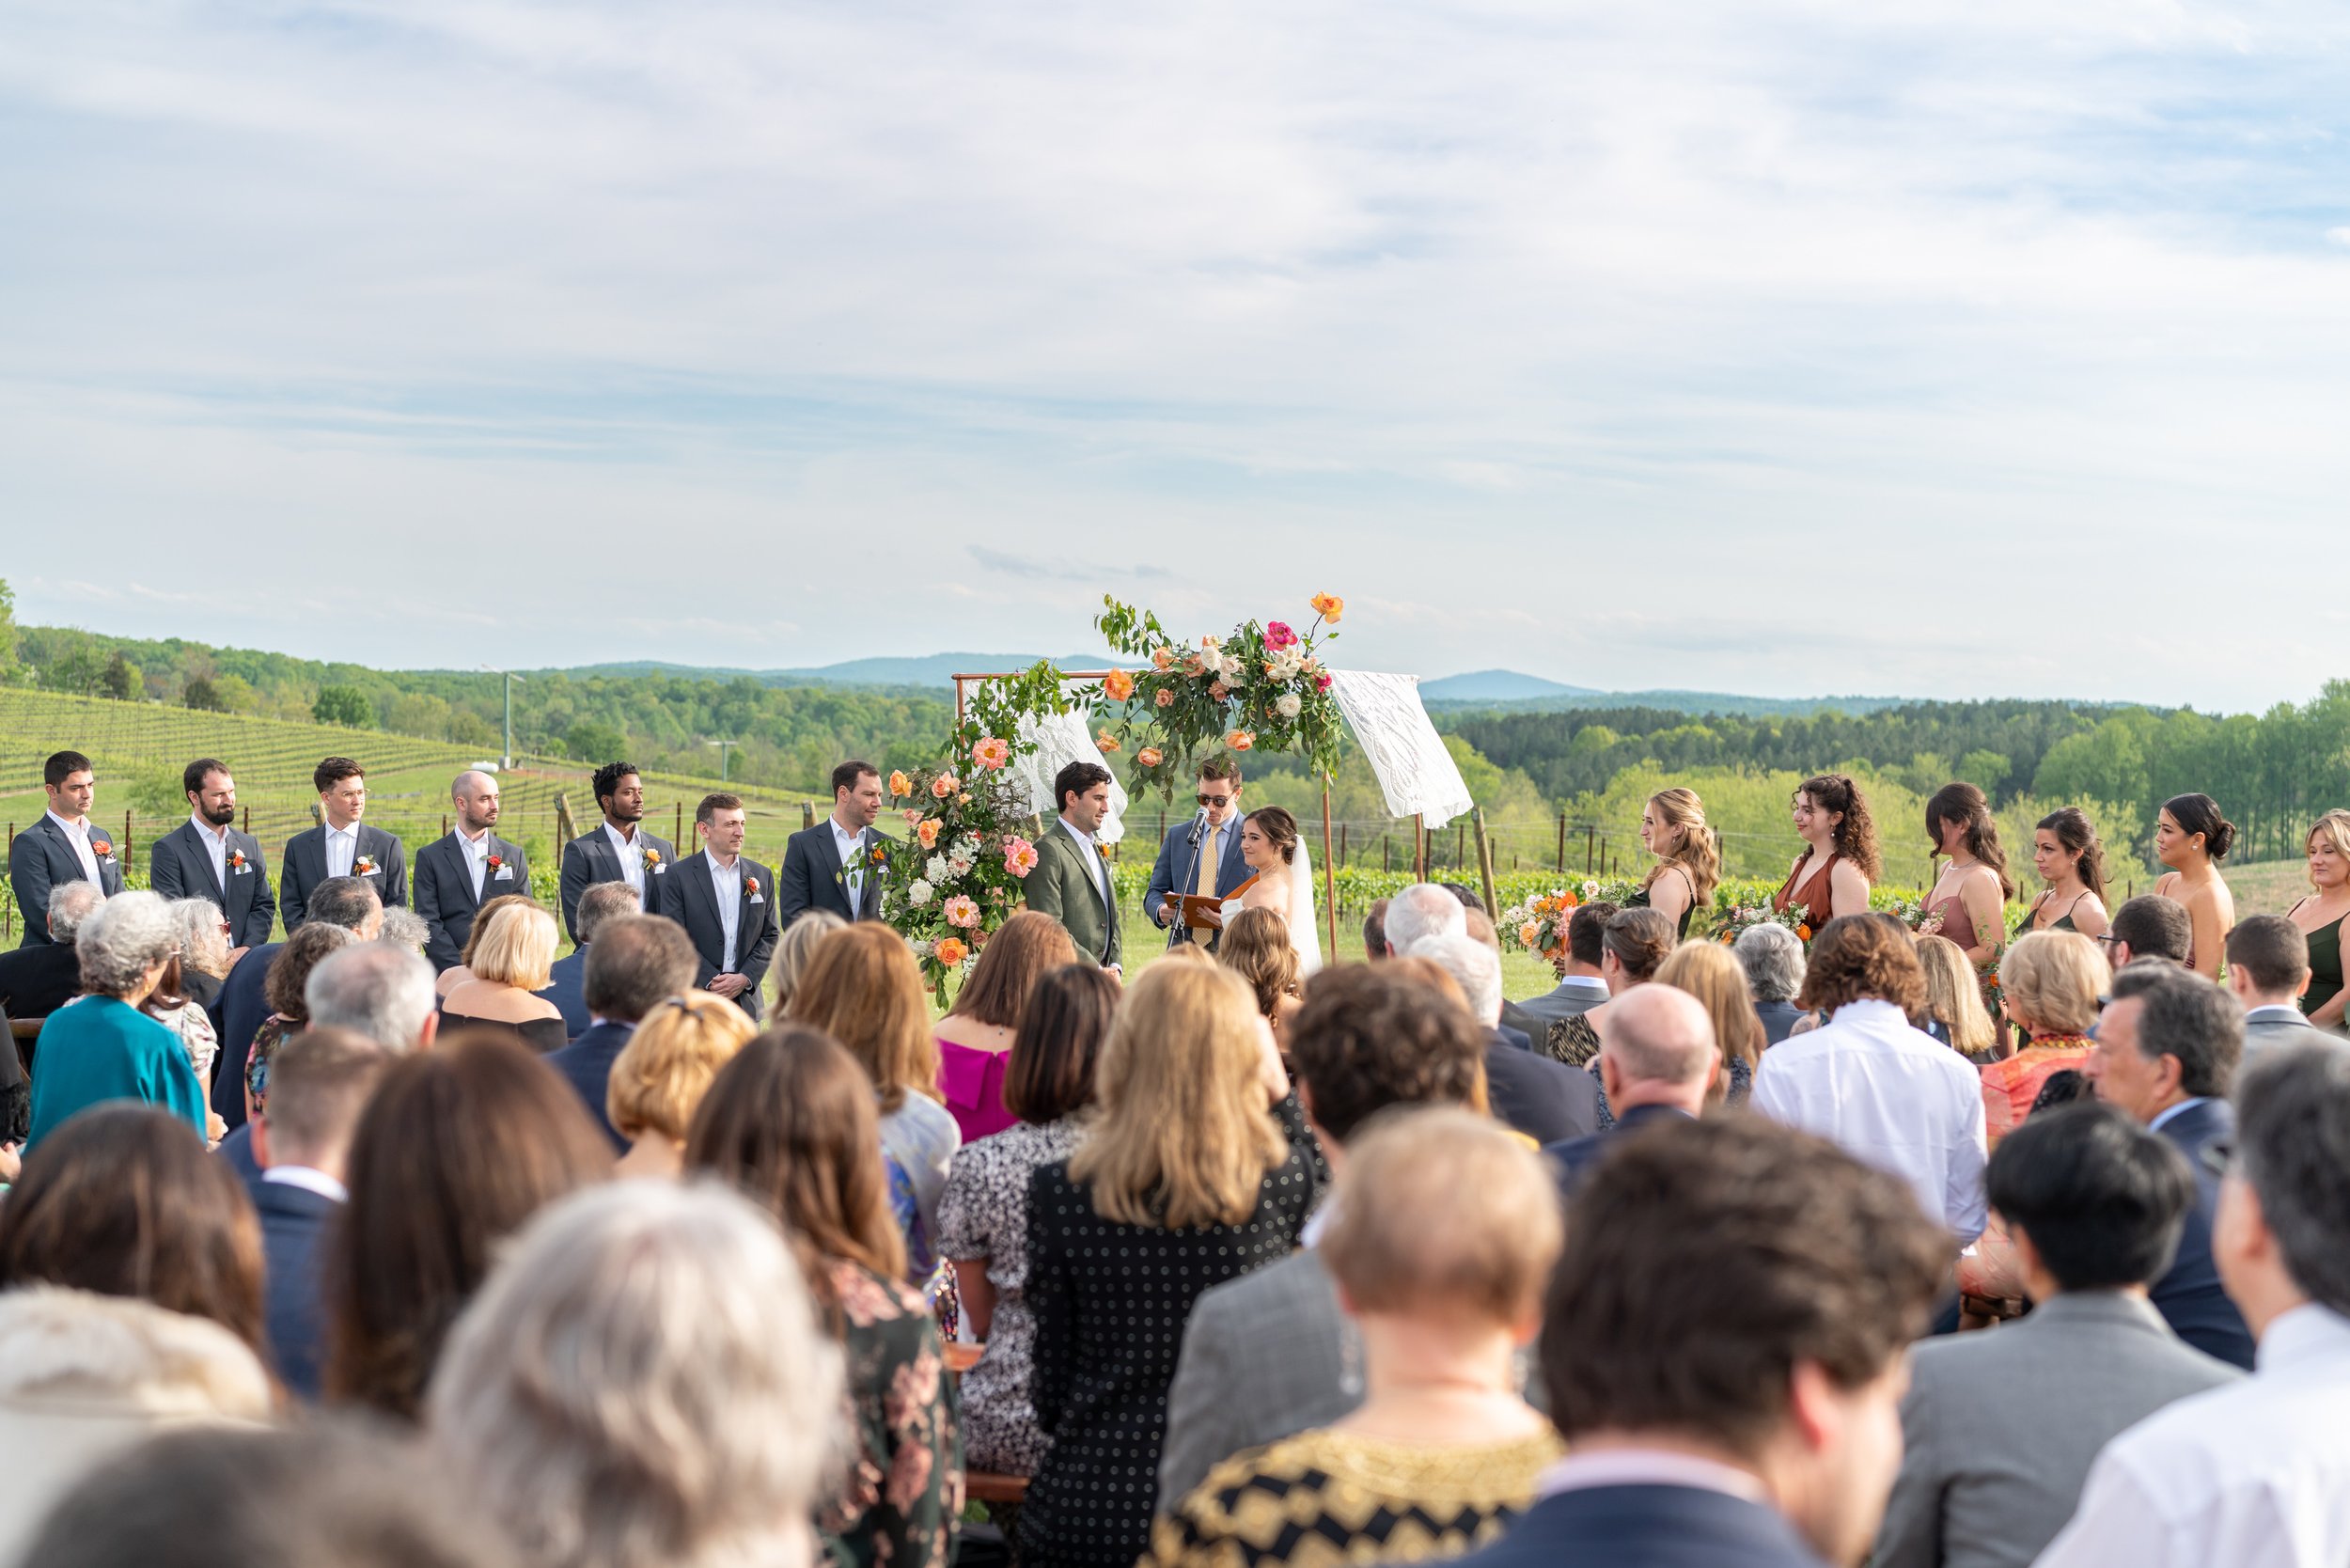 All the wedding guests watch the bride and groom under a copper floral arch